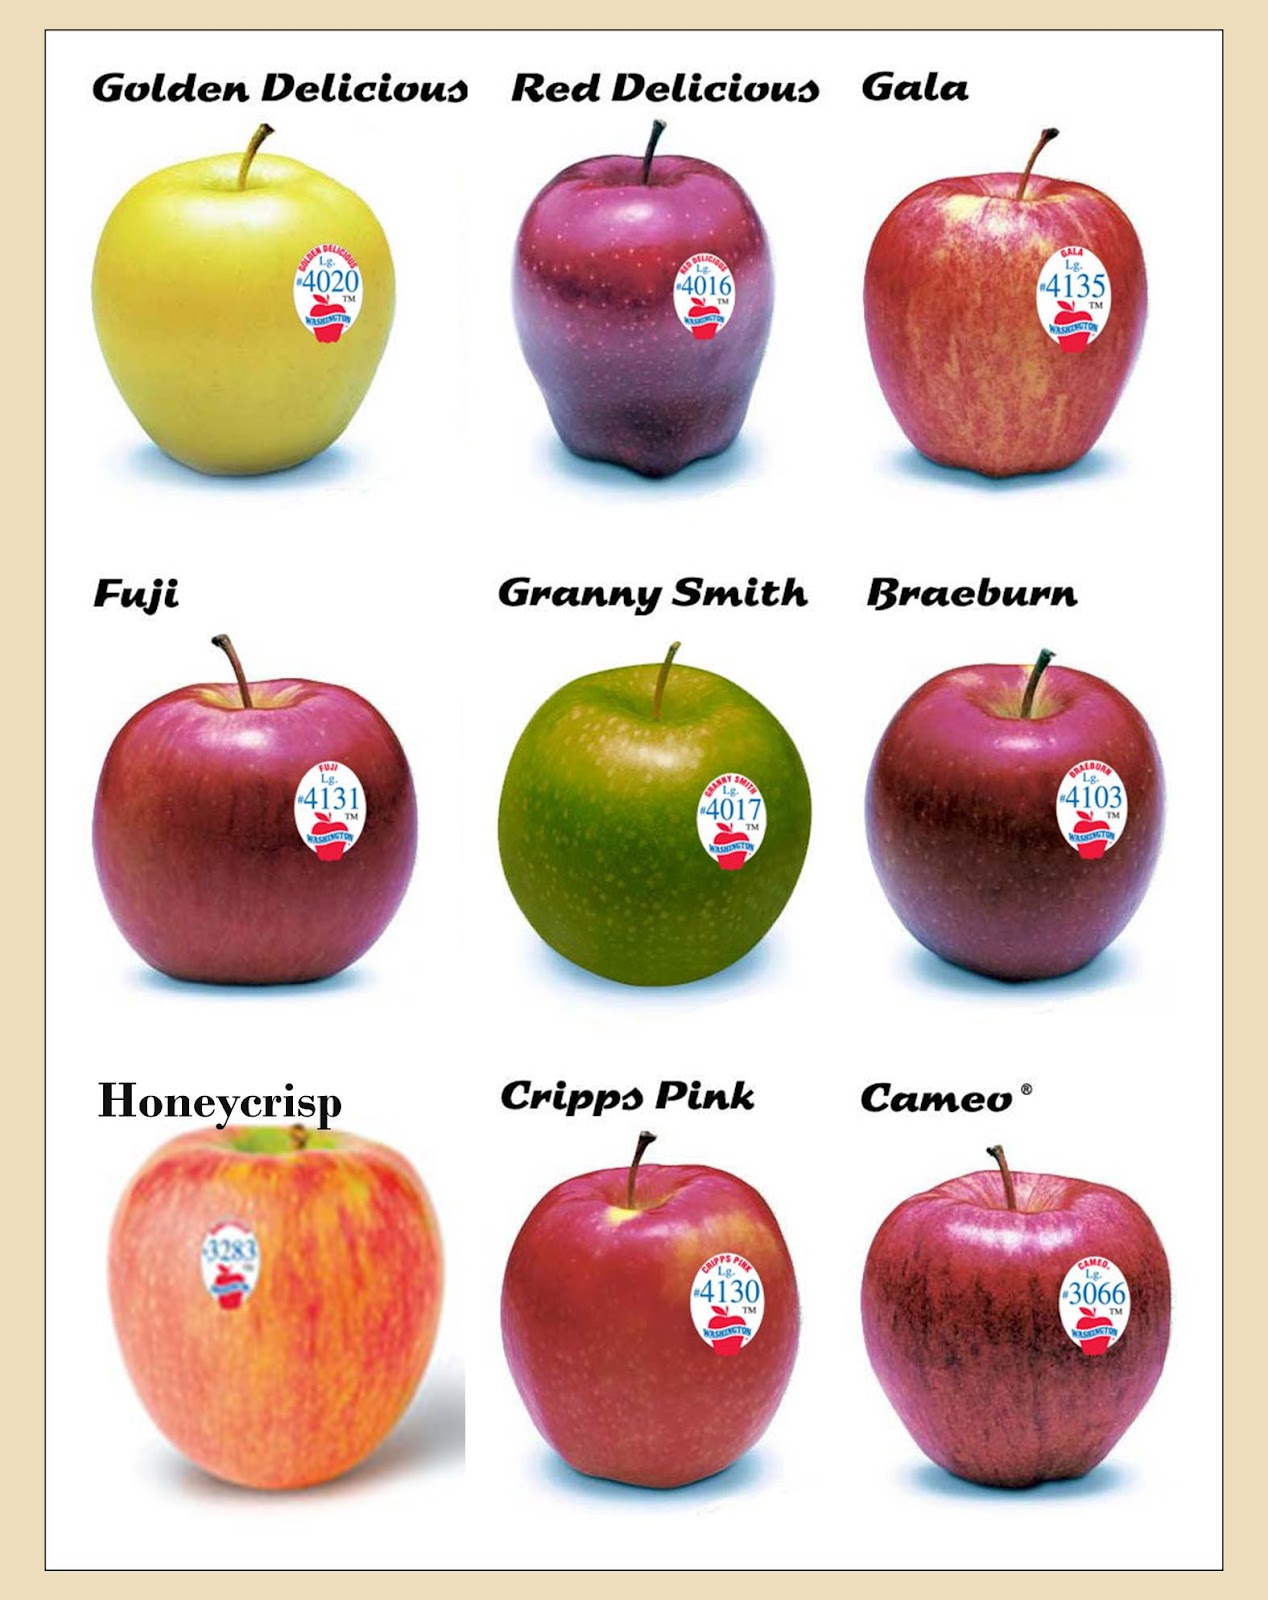 Different Types Of Apples With Pictures Images & Pictures - Becuo